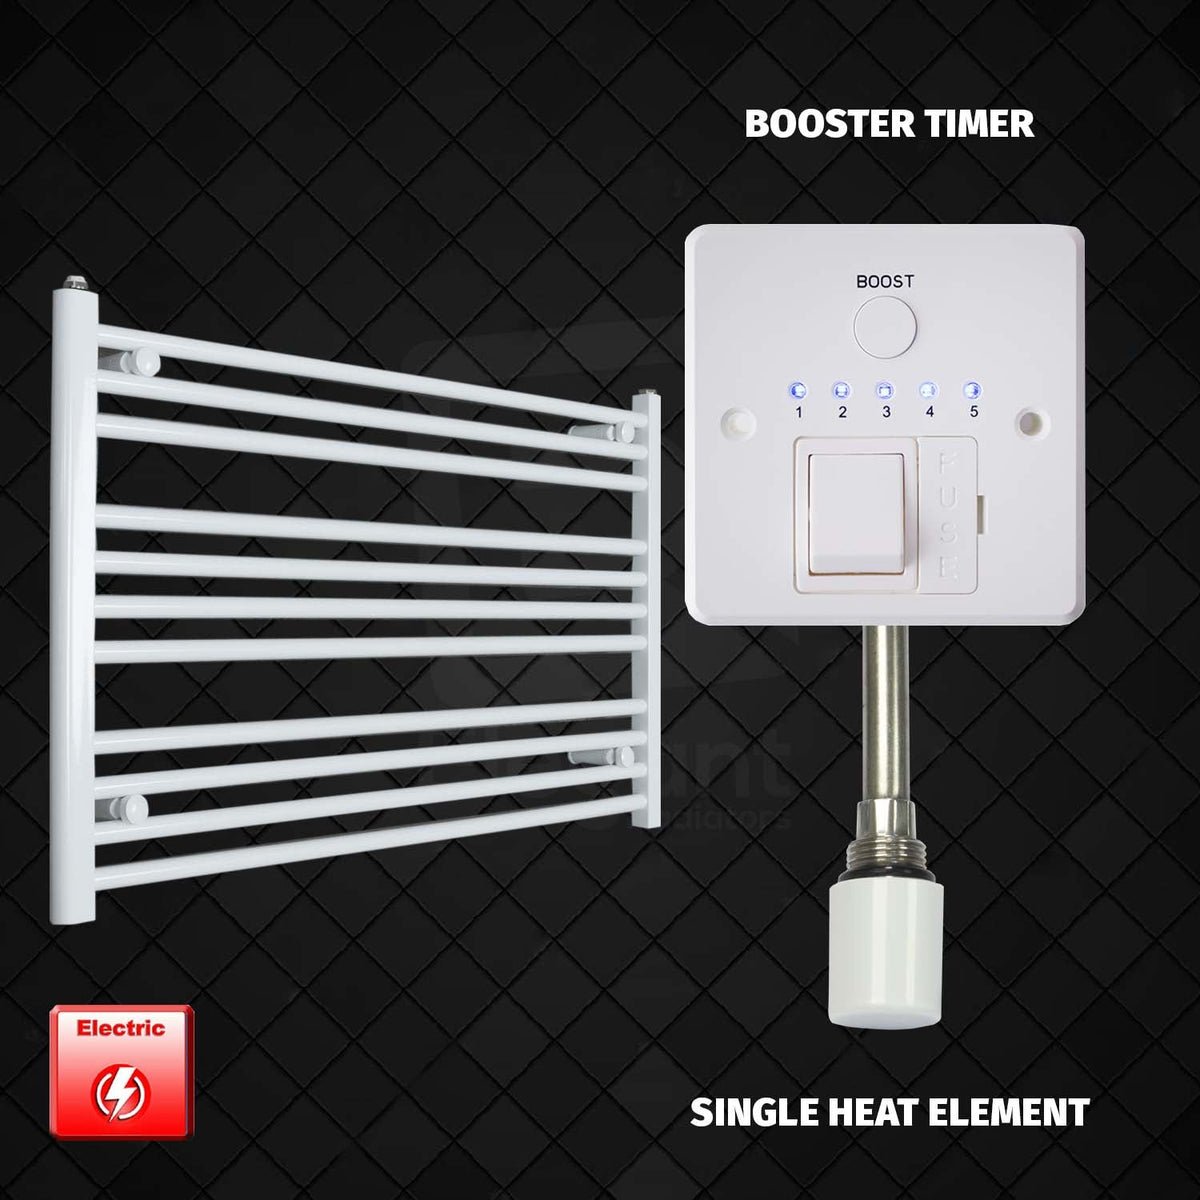 600 mm High 1100 mm Wide Pre-Filled Electric Heated Towel Rail Radiator White HTR Single heat element Booster timer